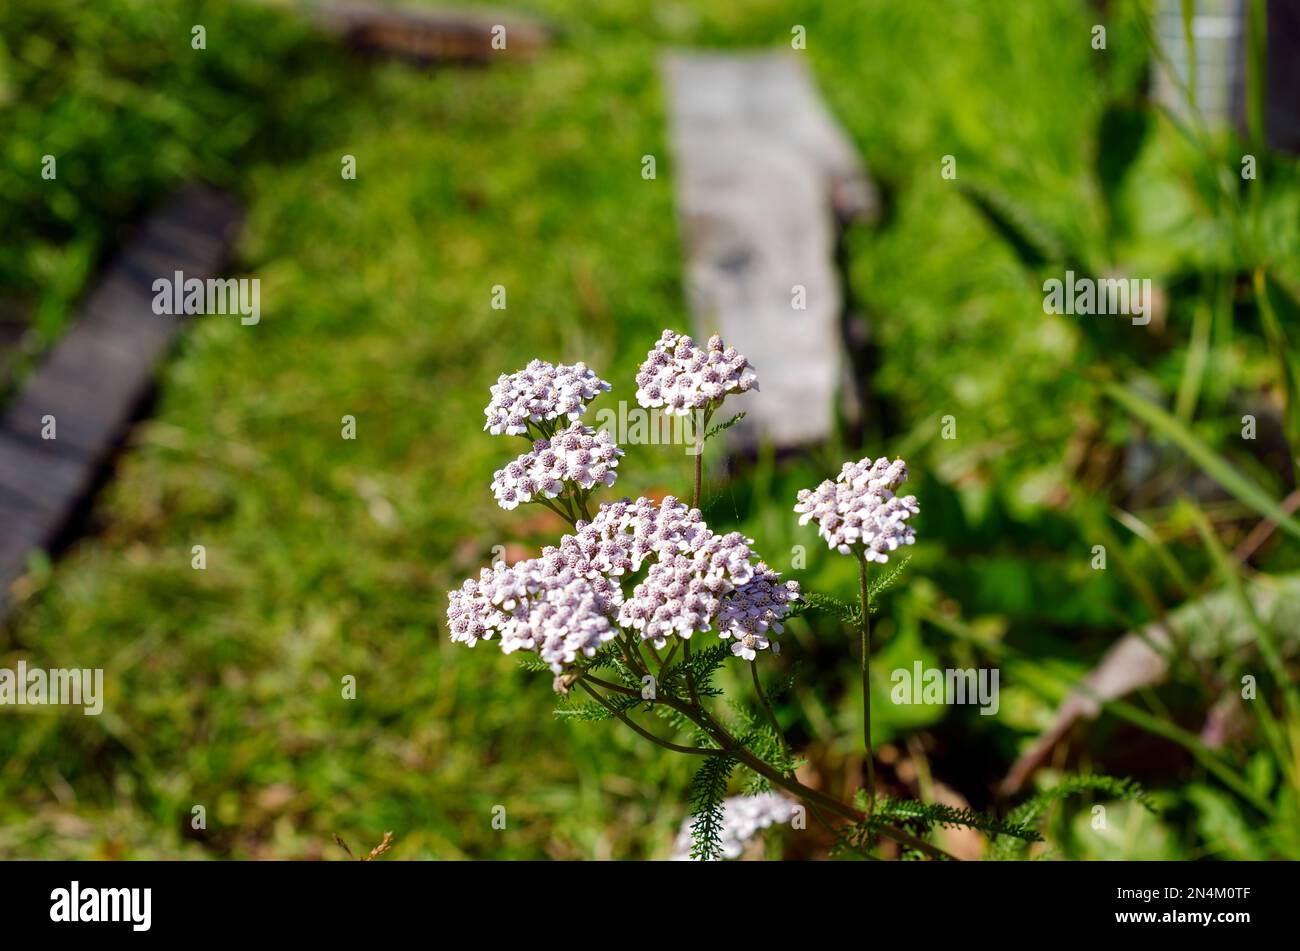 Wild medical plant yarrow with white flowers grows in the garden area on the background of green grass in the summer. Stock Photo